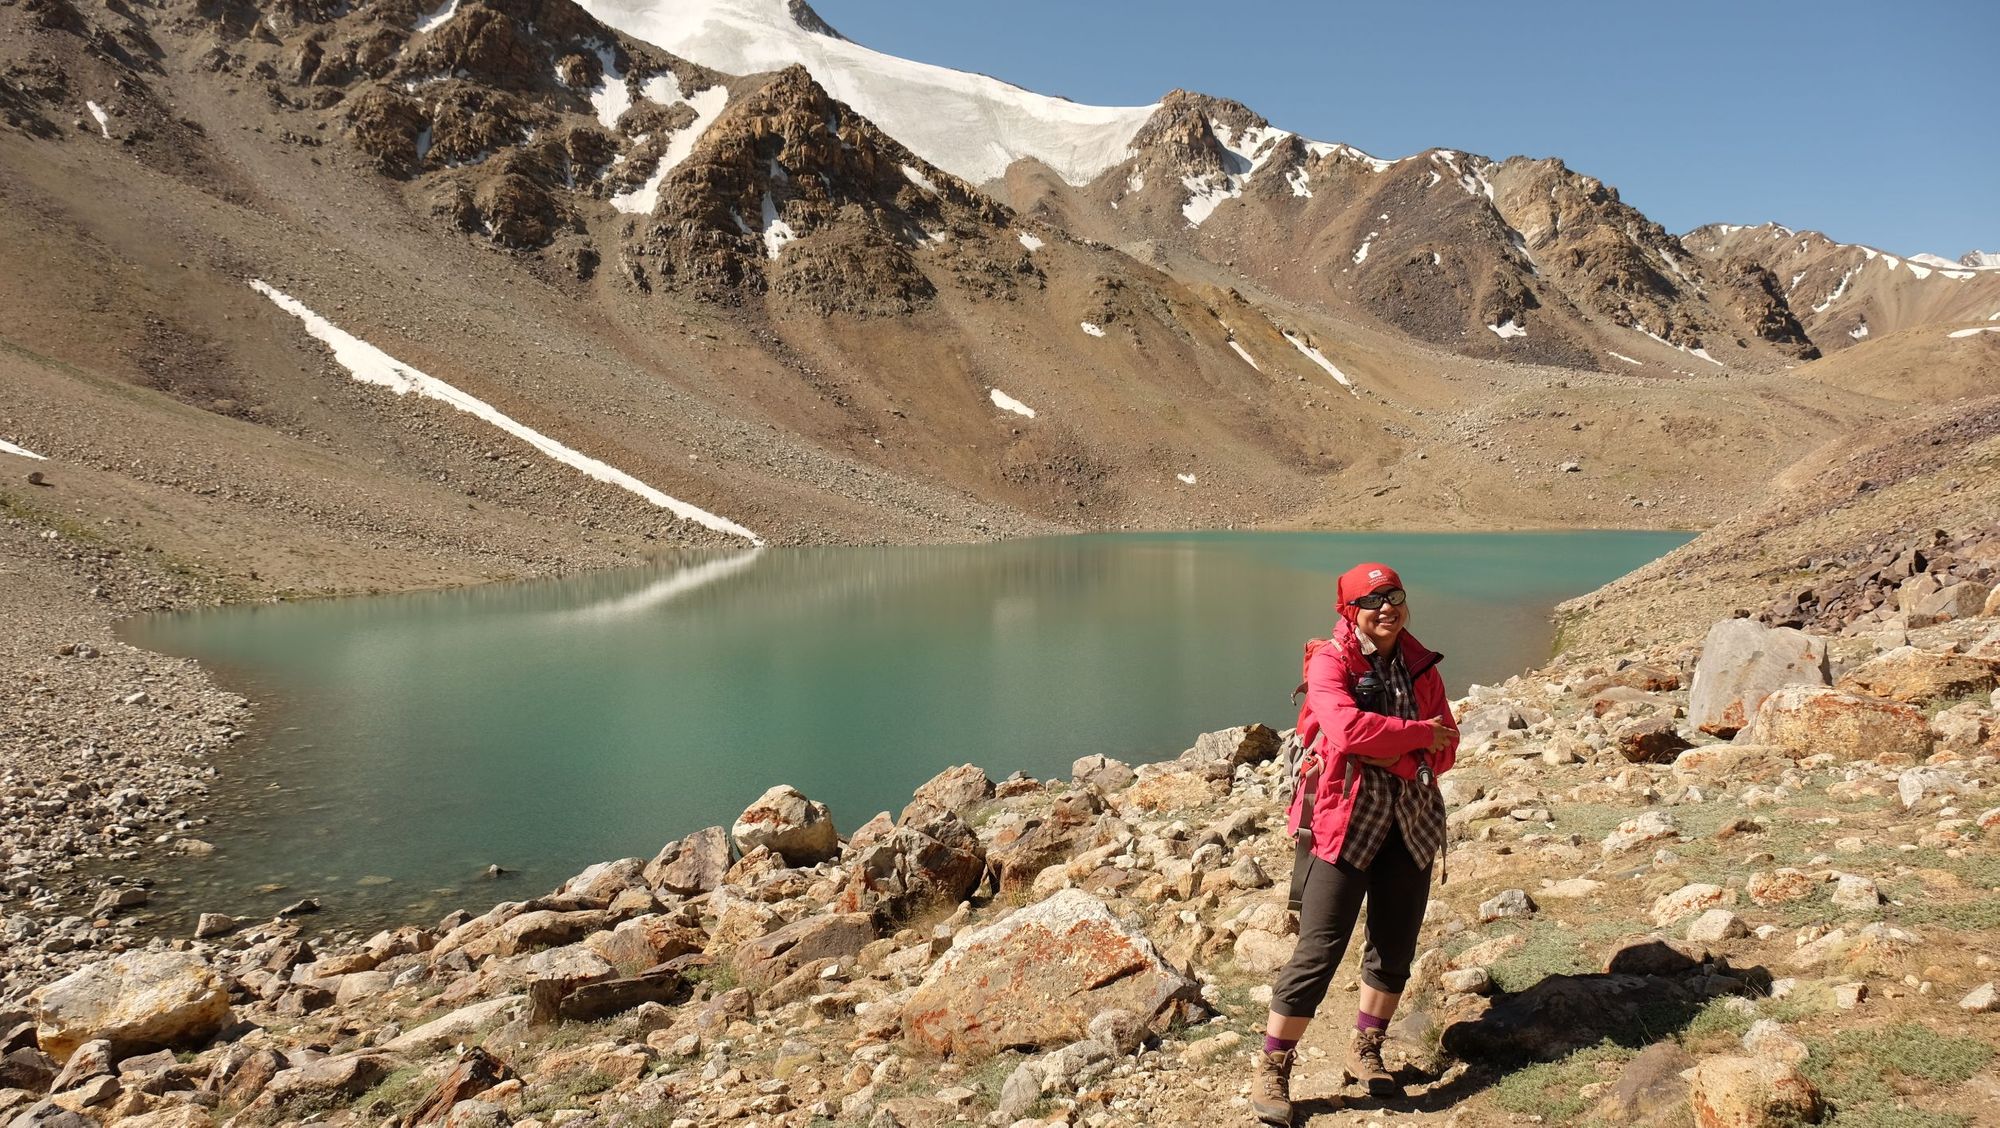 The Woman Using Tourism to Fight for Female Empowerment in Tajikistan